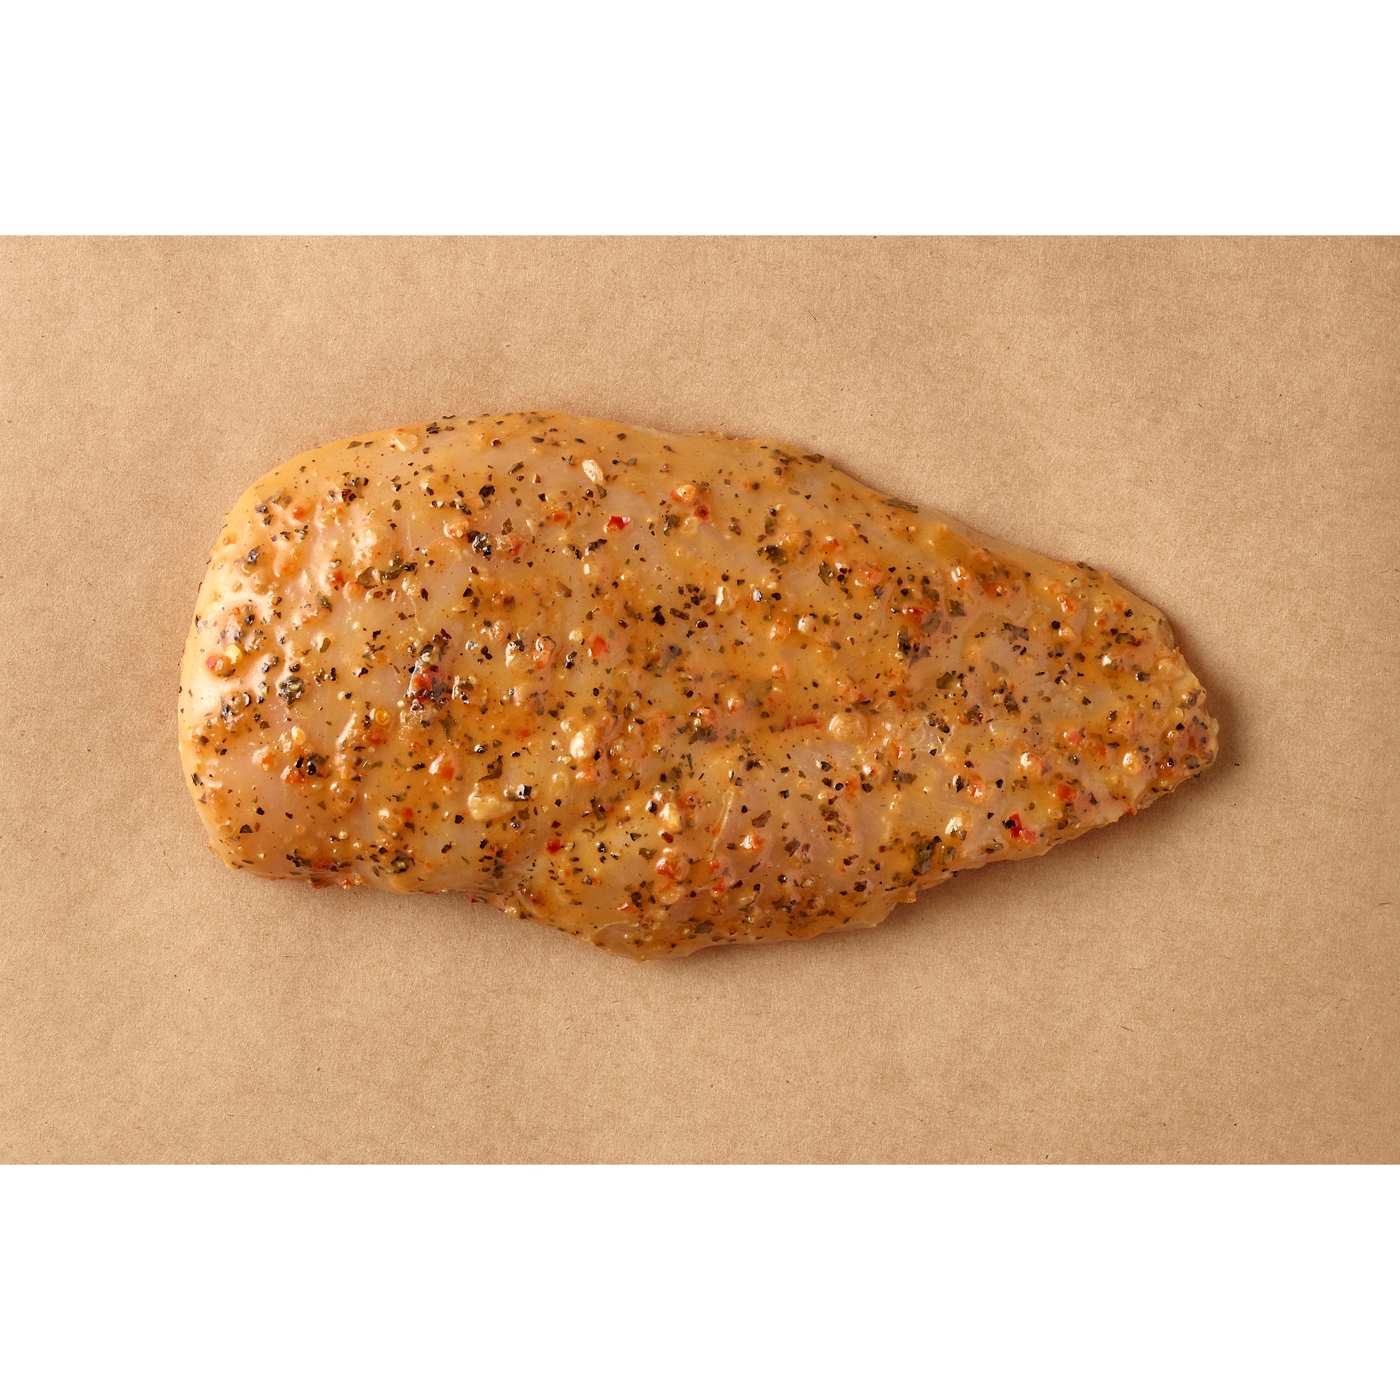 H-E-B Meat Market Marinated Chicken Breast - Southwest Style; image 4 of 4